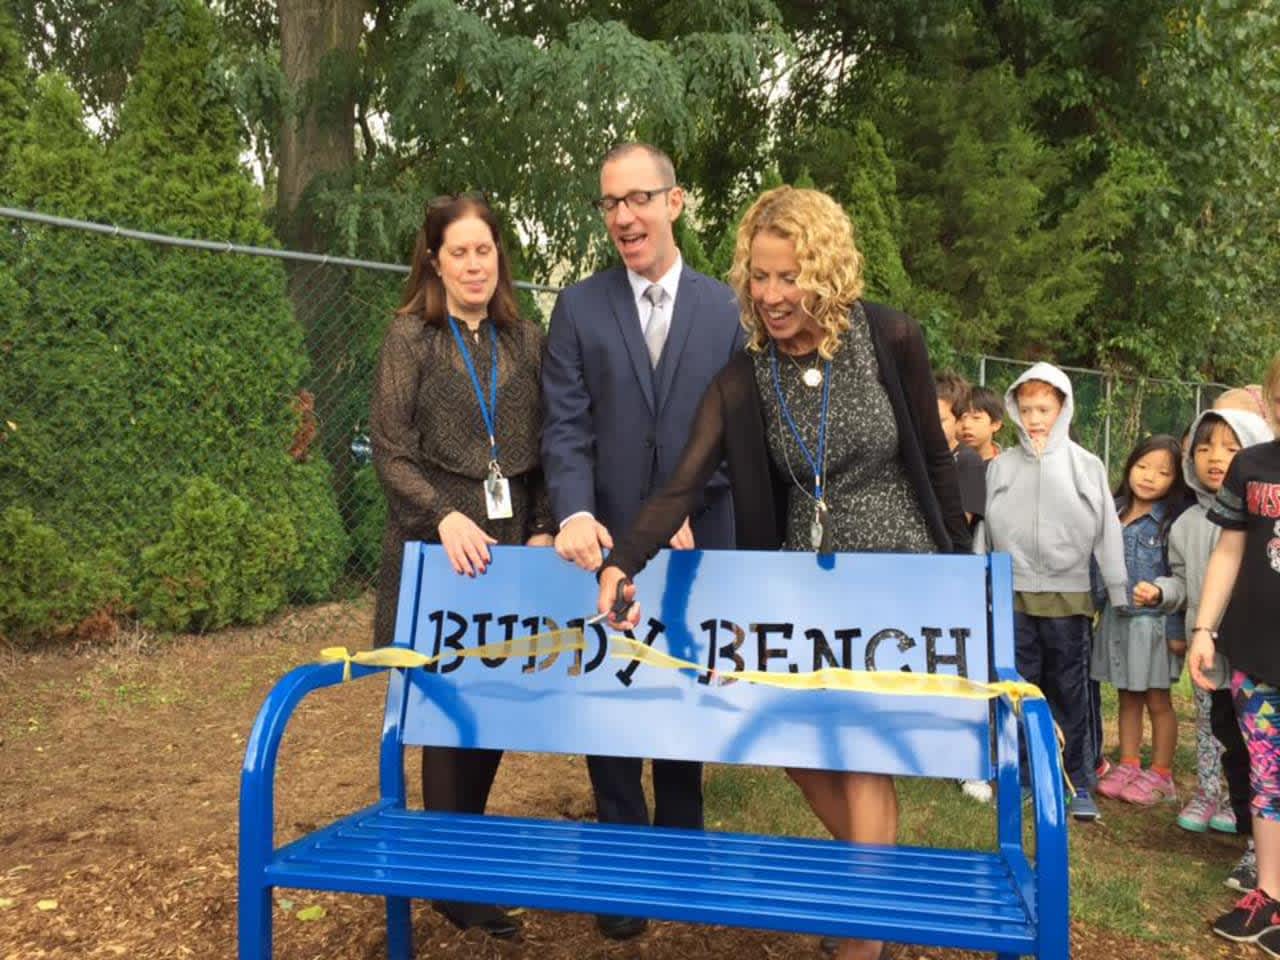 Mrs. Alberti, Principal DeLaura and Superintendent Gross at Norwood School's Buddy Bench ribbon cutting.